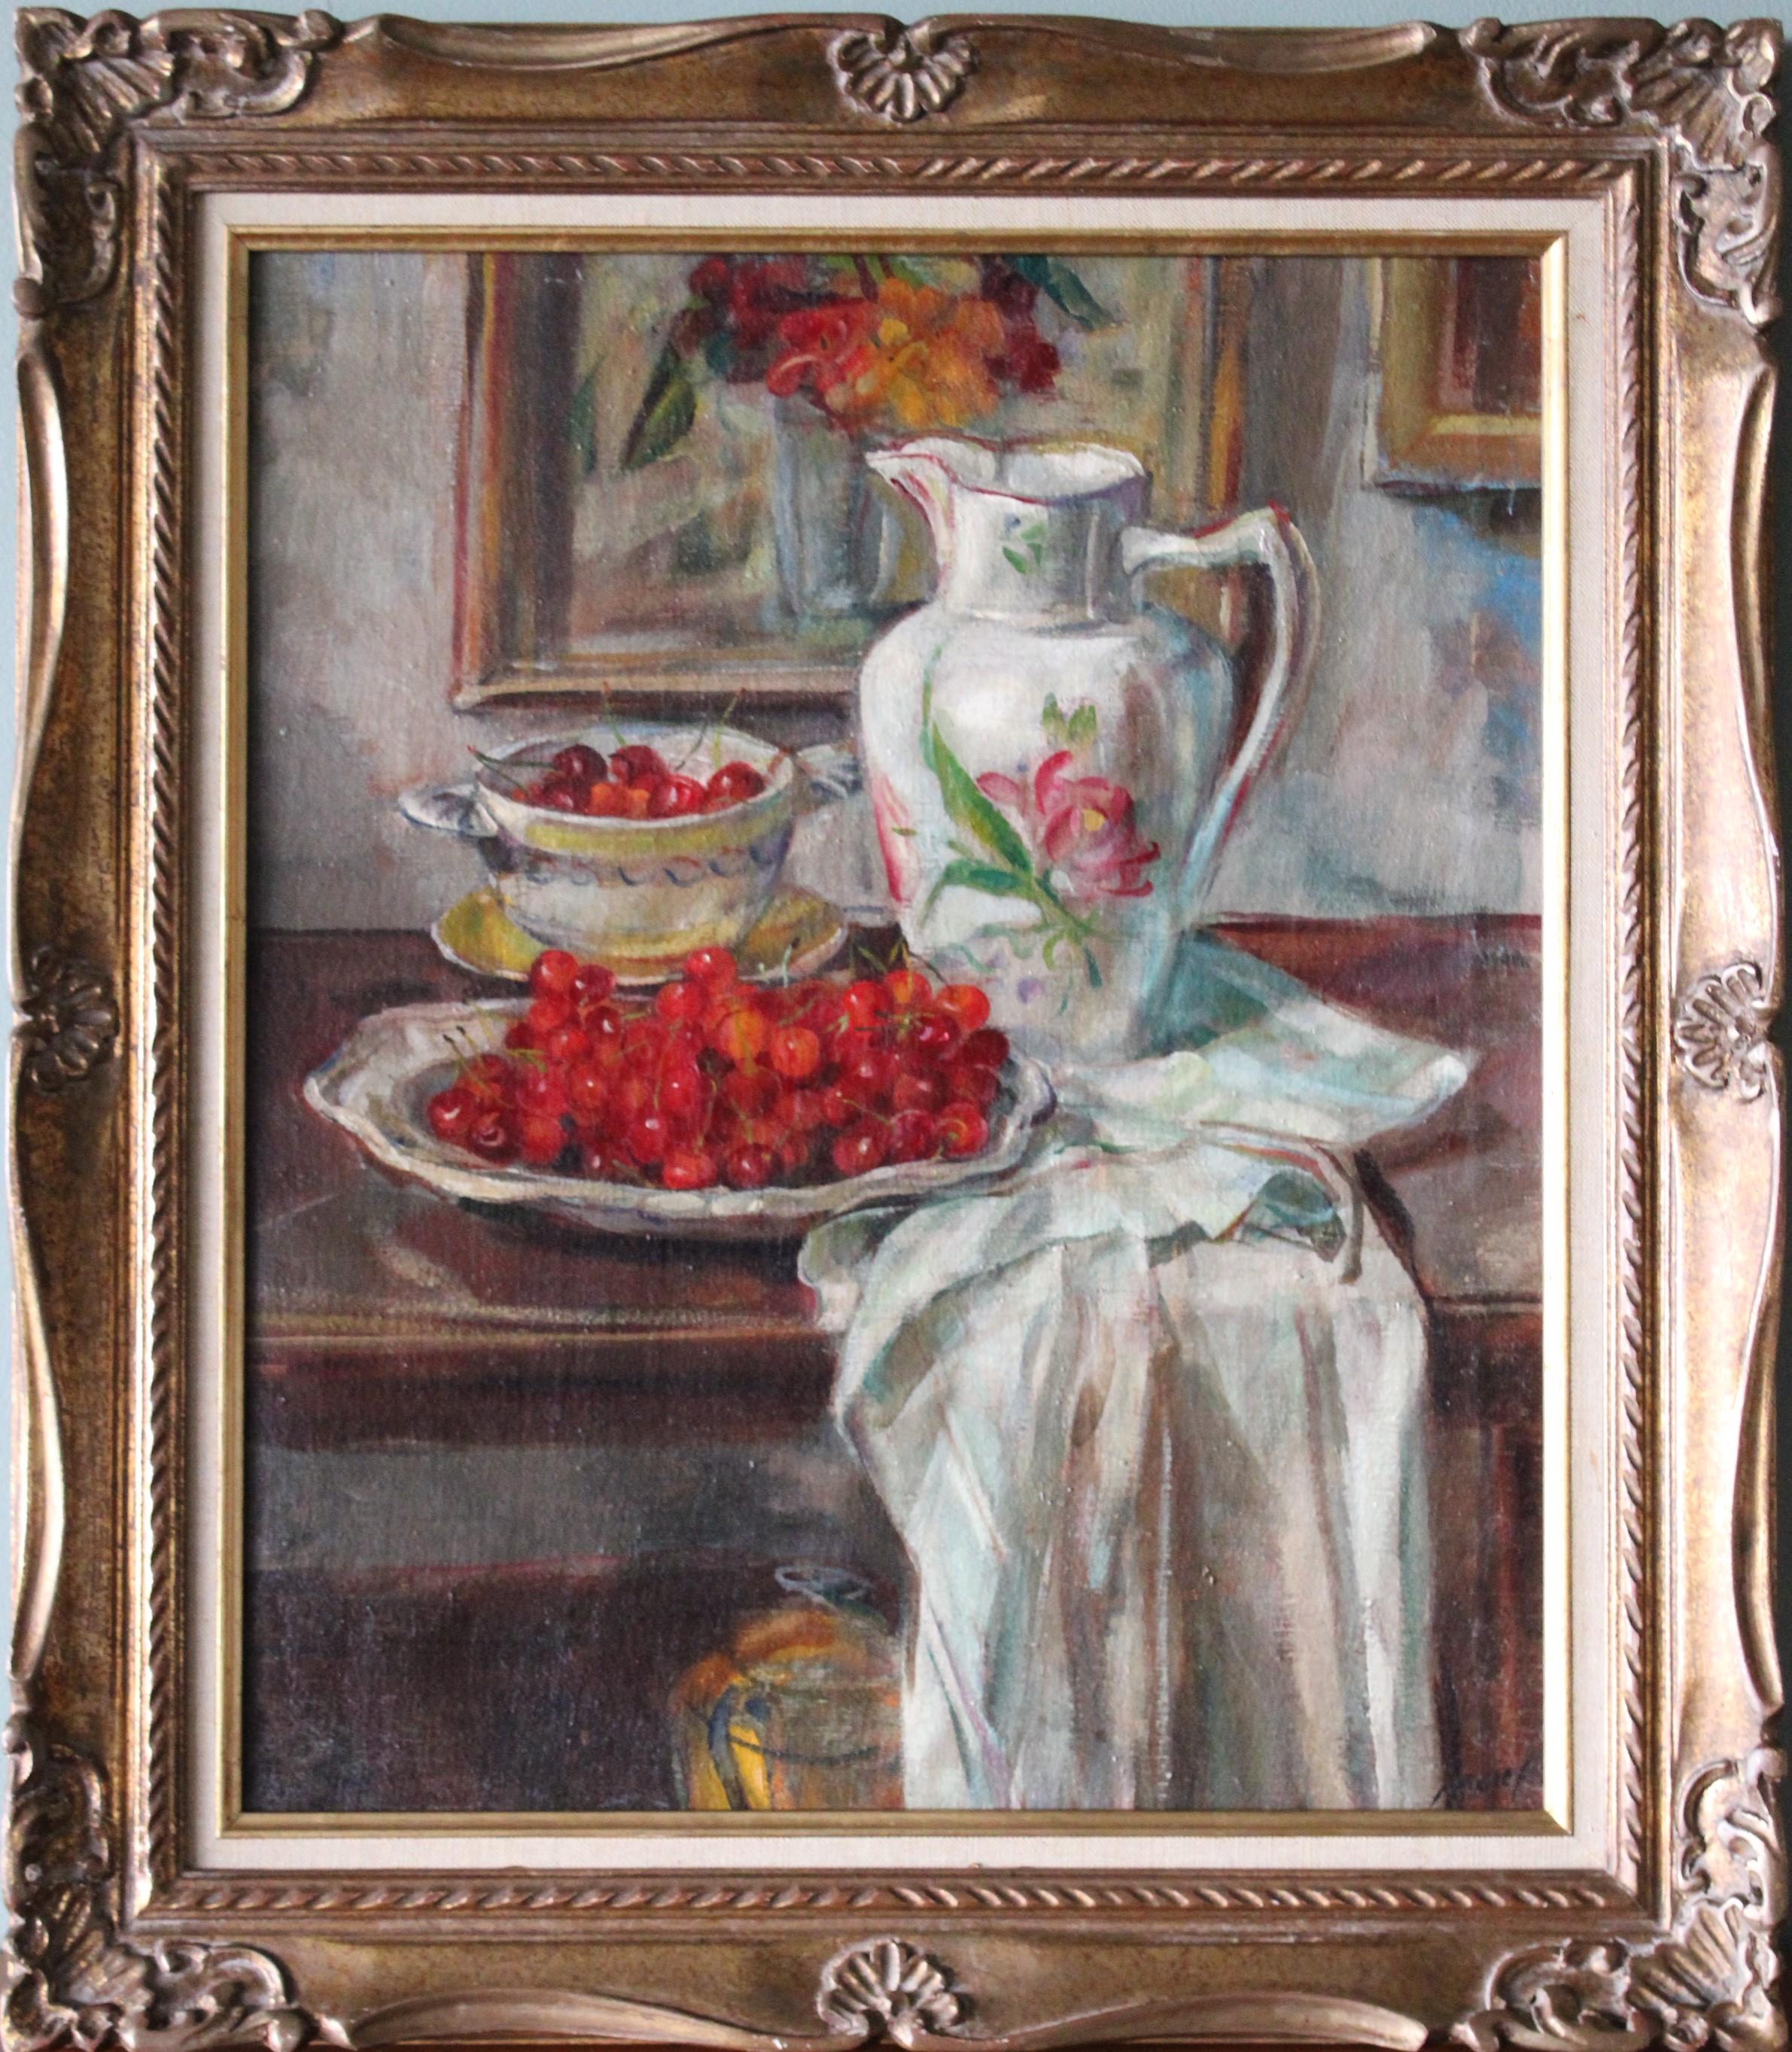 Antique Still Life oil painting of cherries and jug, interior scene signed Morel